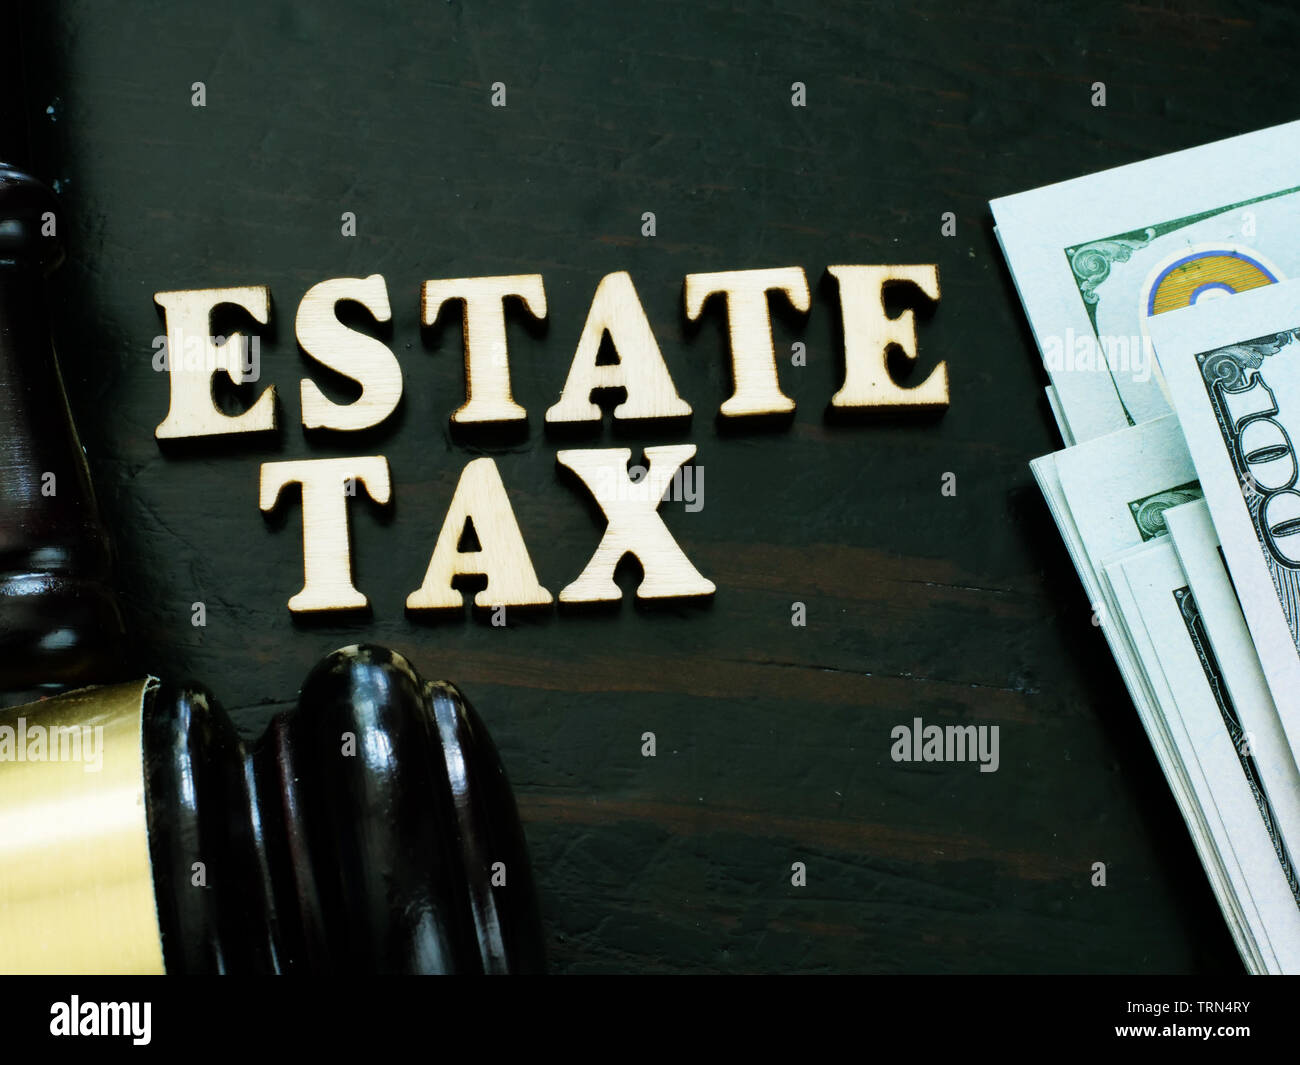 Estate tax from wooden letters and gavel. Stock Photo